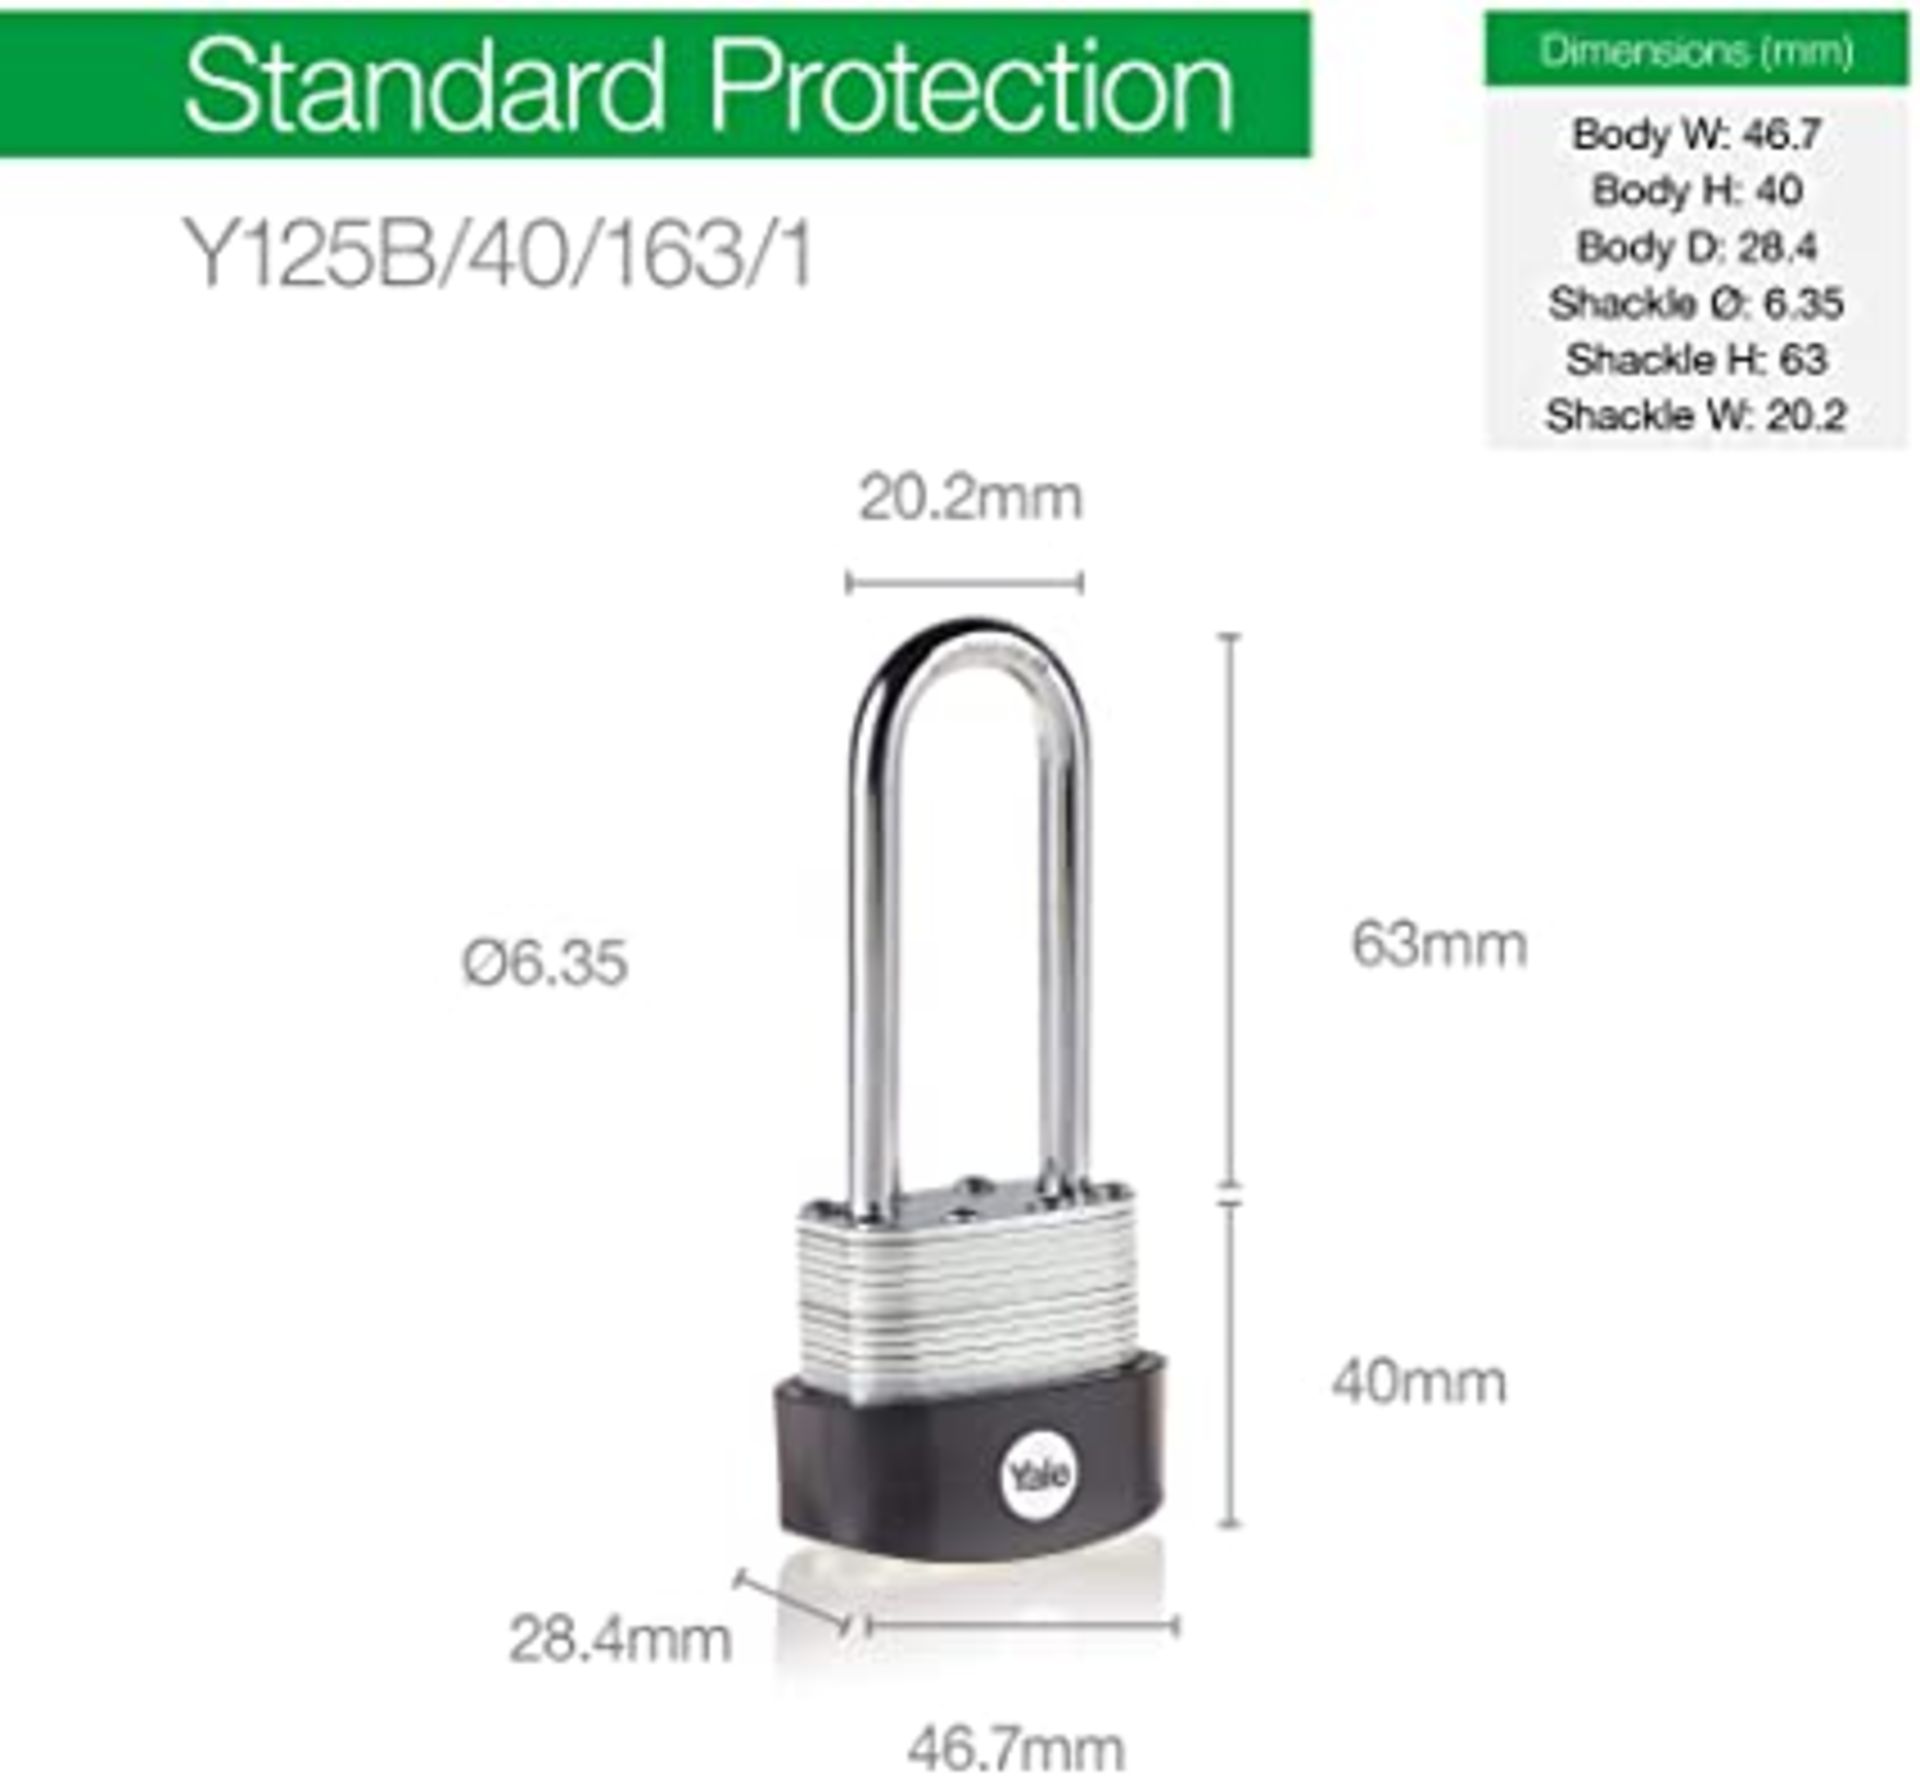 RRP - £12.99 Yale Y125B/40/163/1 - Laminated Steel Long Shackle Padlock (40 mm) - Outdoor Hardened S - Image 2 of 2